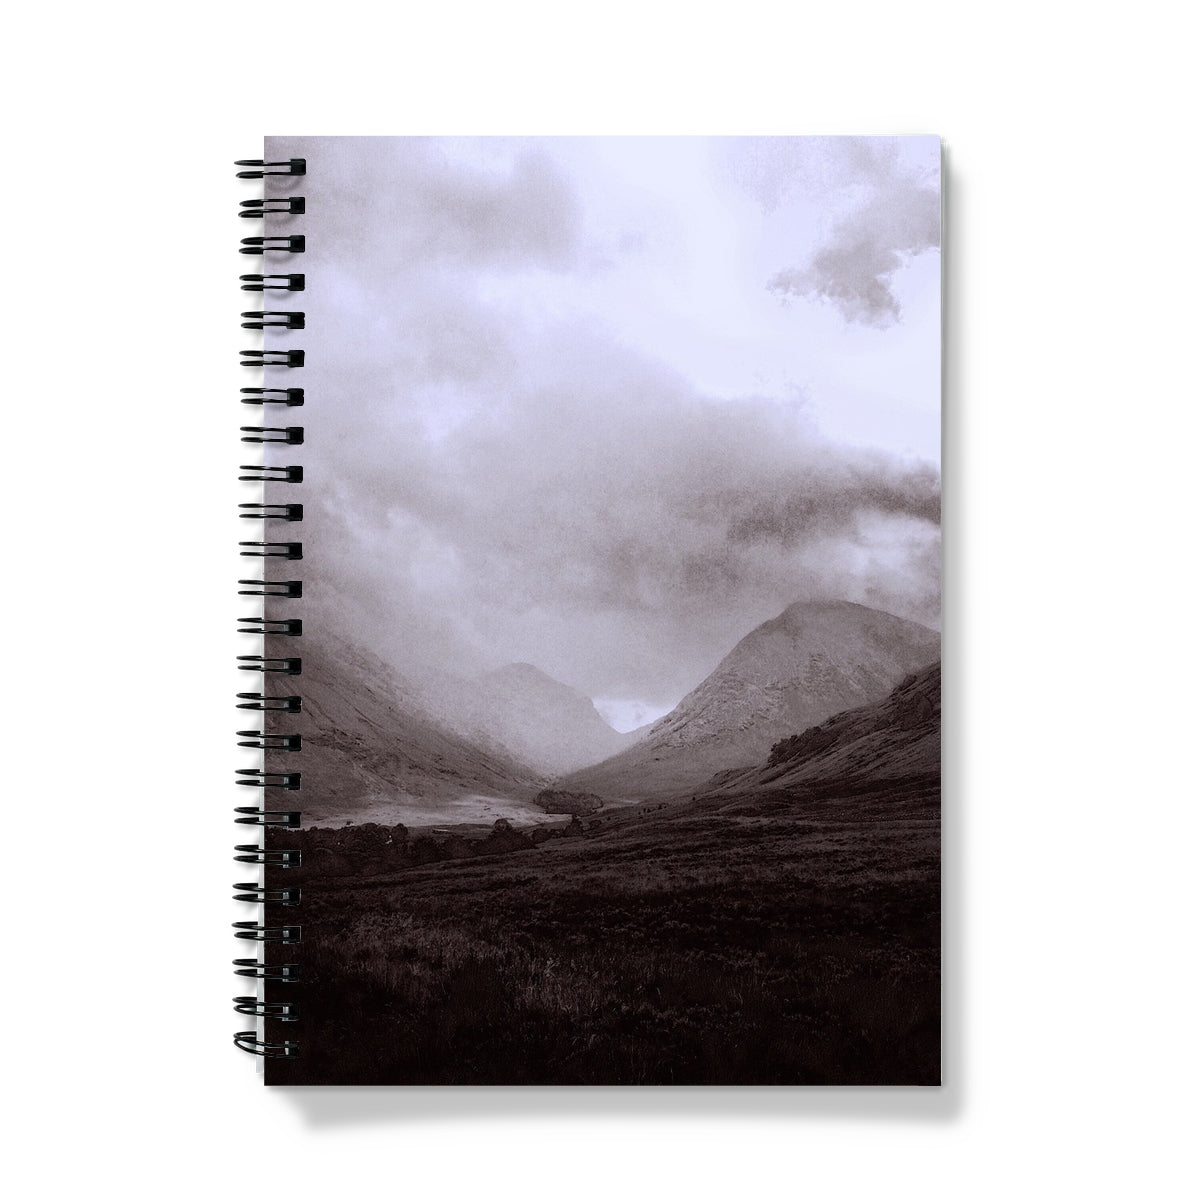 Glencoe Mist Art Gifts Notebook-Journals & Notebooks-Glencoe Art Gallery-A5-Lined-Paintings, Prints, Homeware, Art Gifts From Scotland By Scottish Artist Kevin Hunter